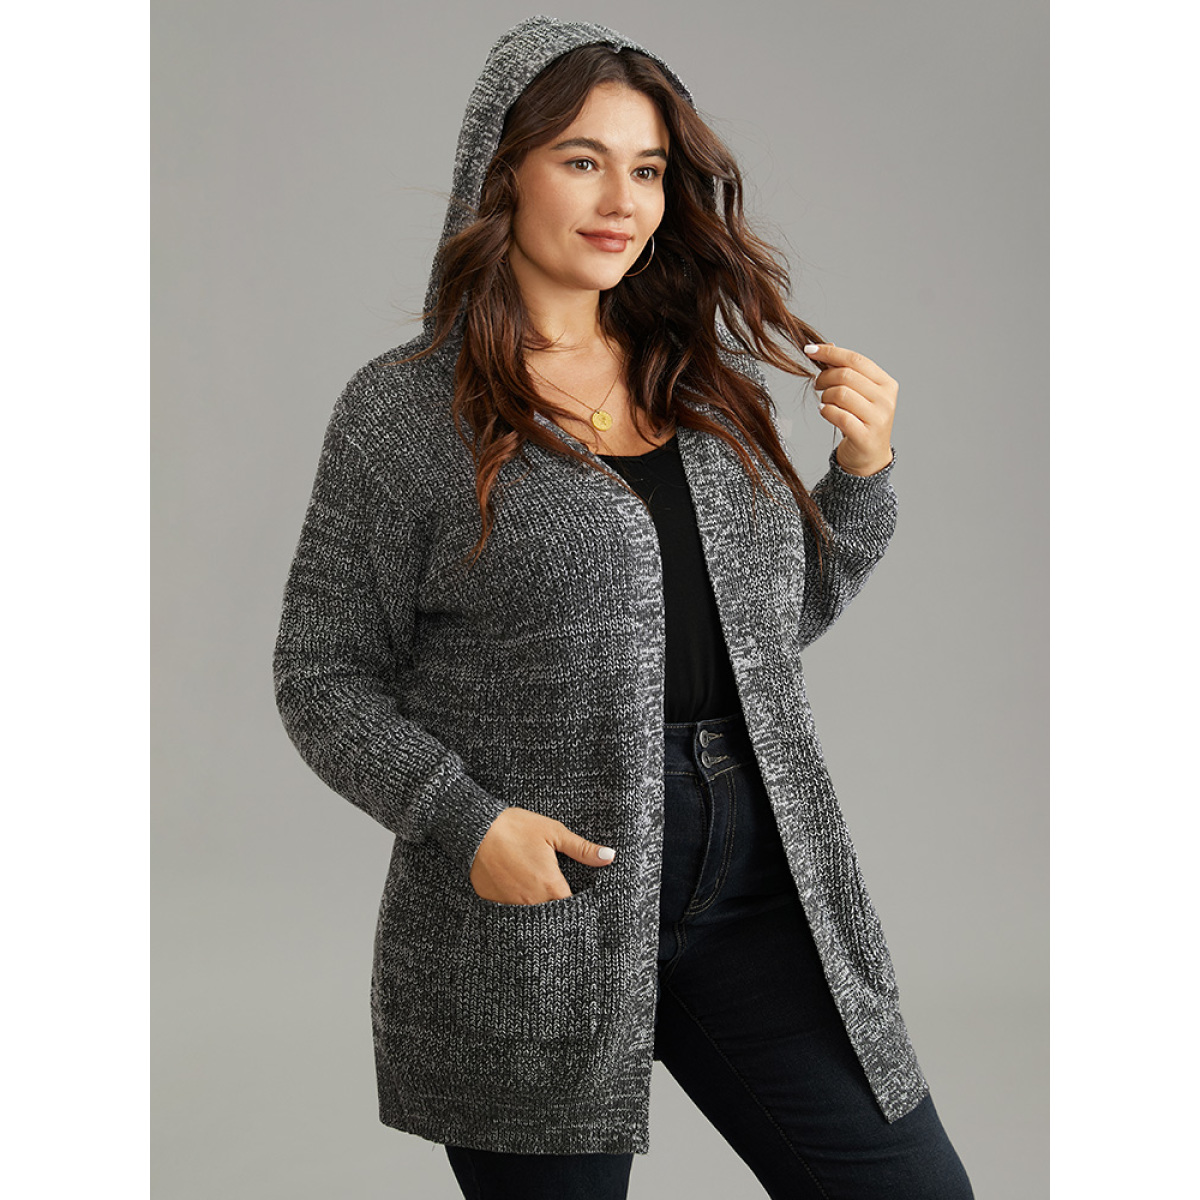 

Plus Size Heather Hooded Patched Pocket Open Front Tunic Cardigan Gray Women Casual Loose Long Sleeve Dailywear Cardigans BloomChic